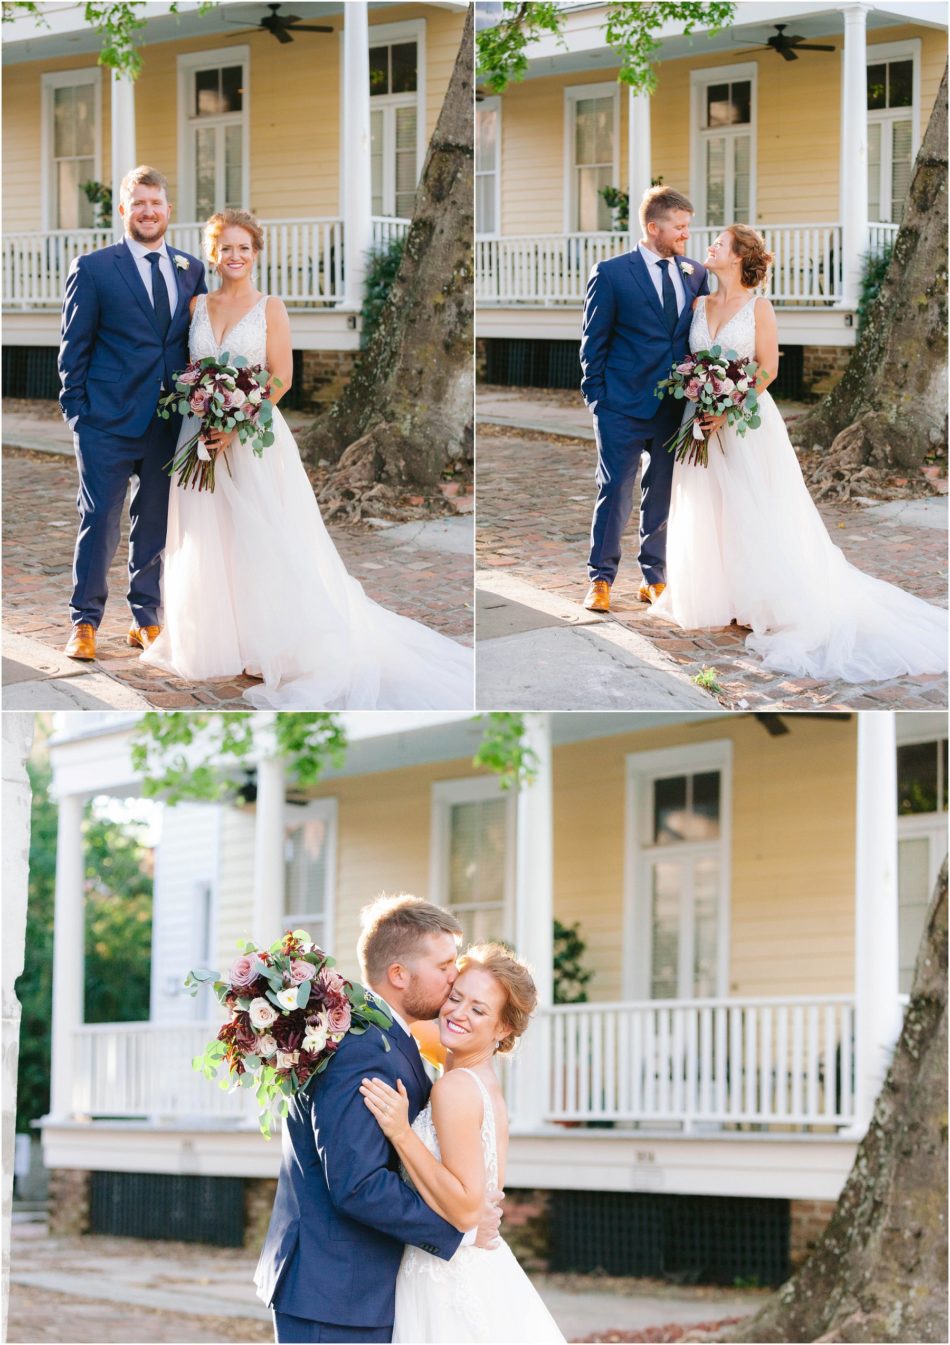 Upstairs at midtown elopement, Kate Timbers Photography. http://katetimbers.com #katetimbersphotography // Charleston Photography // Inspiration